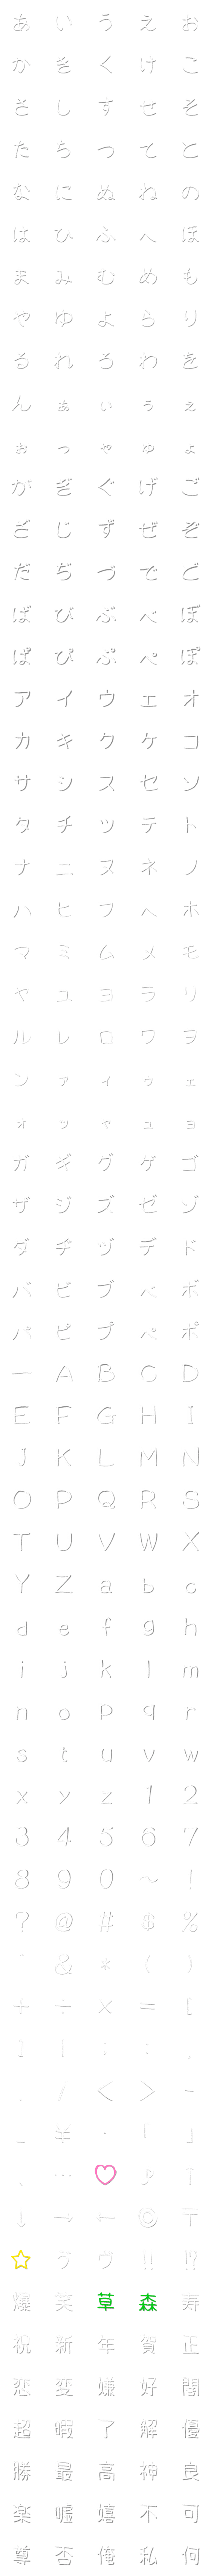 [LINE絵文字]可愛いチョーク風デコ文字の画像一覧